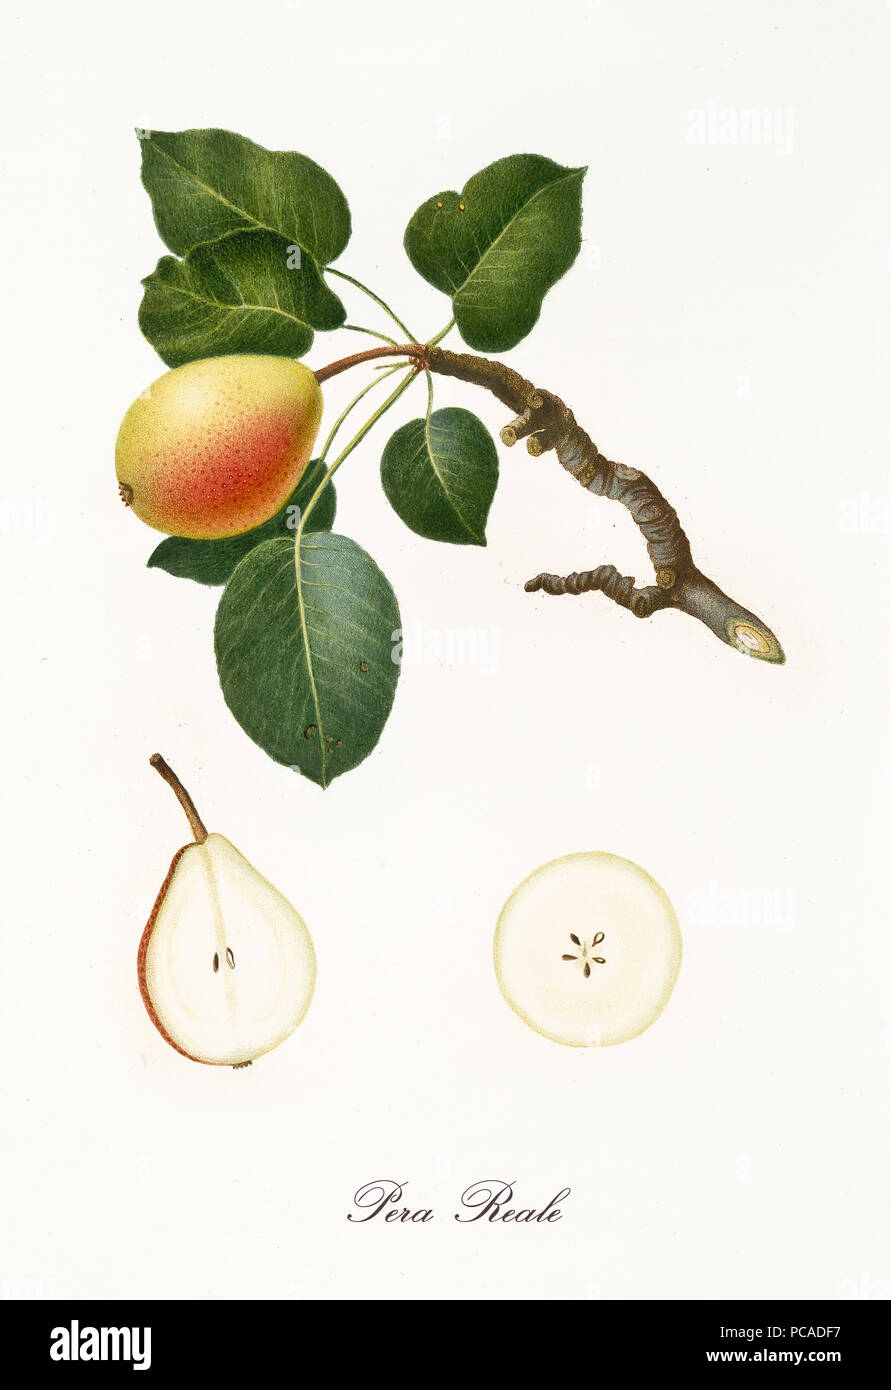 Pear, called royal pear, on its single branch with leaves and isolated single fruit section on white background. Old botanical detailed illustration realized by Giorgio Gallesio on 1817, 1839 Stock Photo